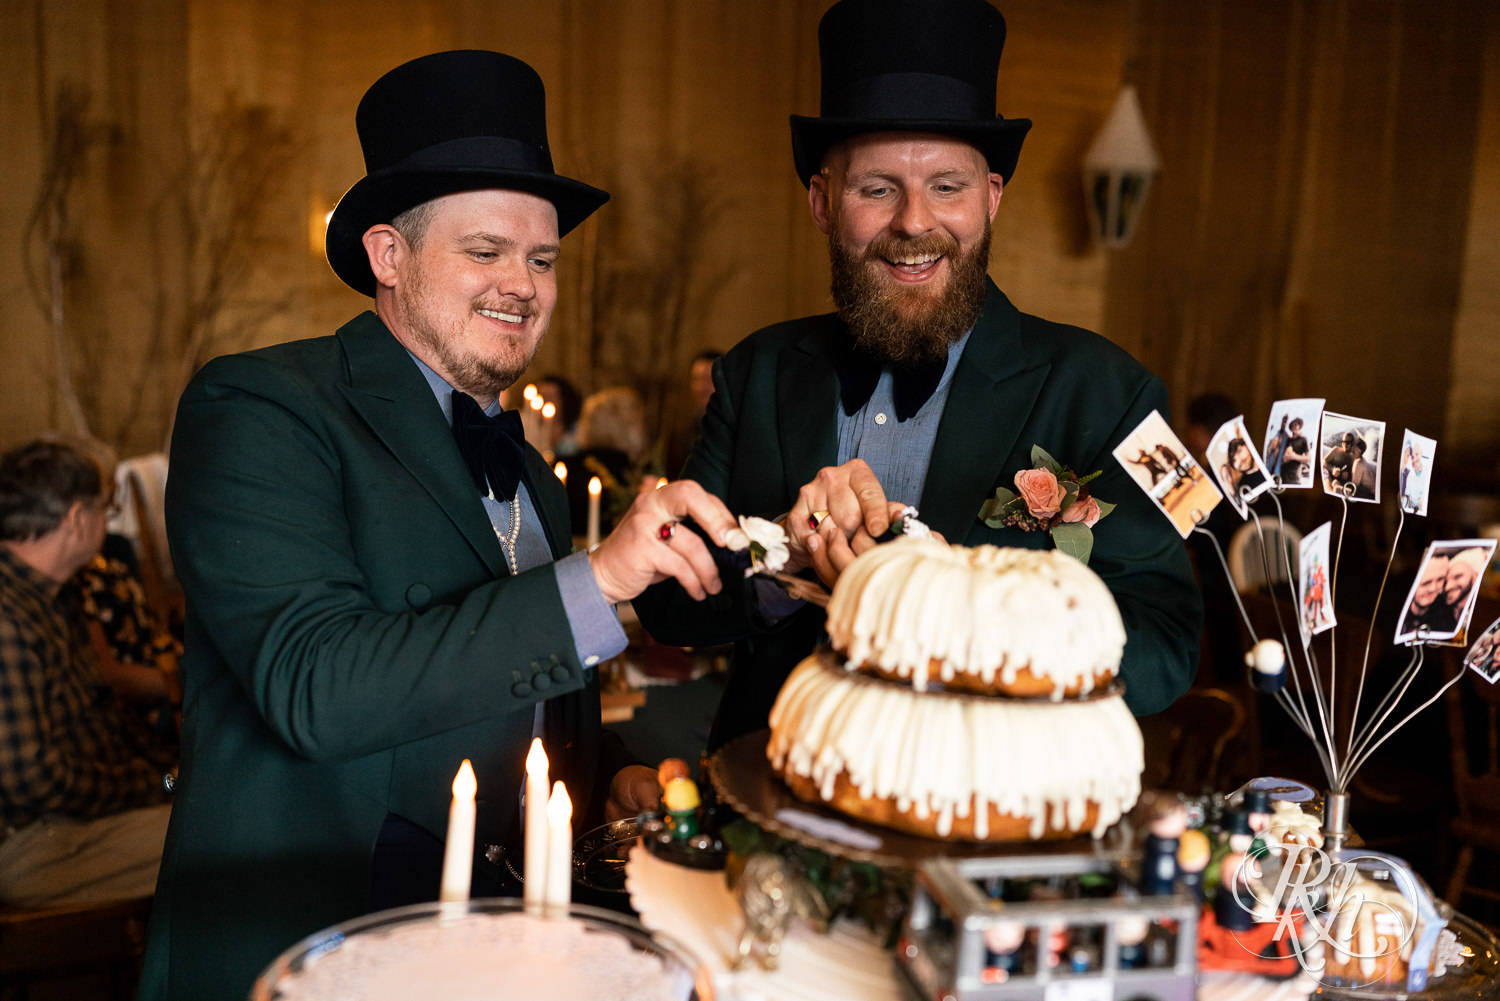 Grooms cutting cake at their wedding in Belle Plaine, Minnesota.